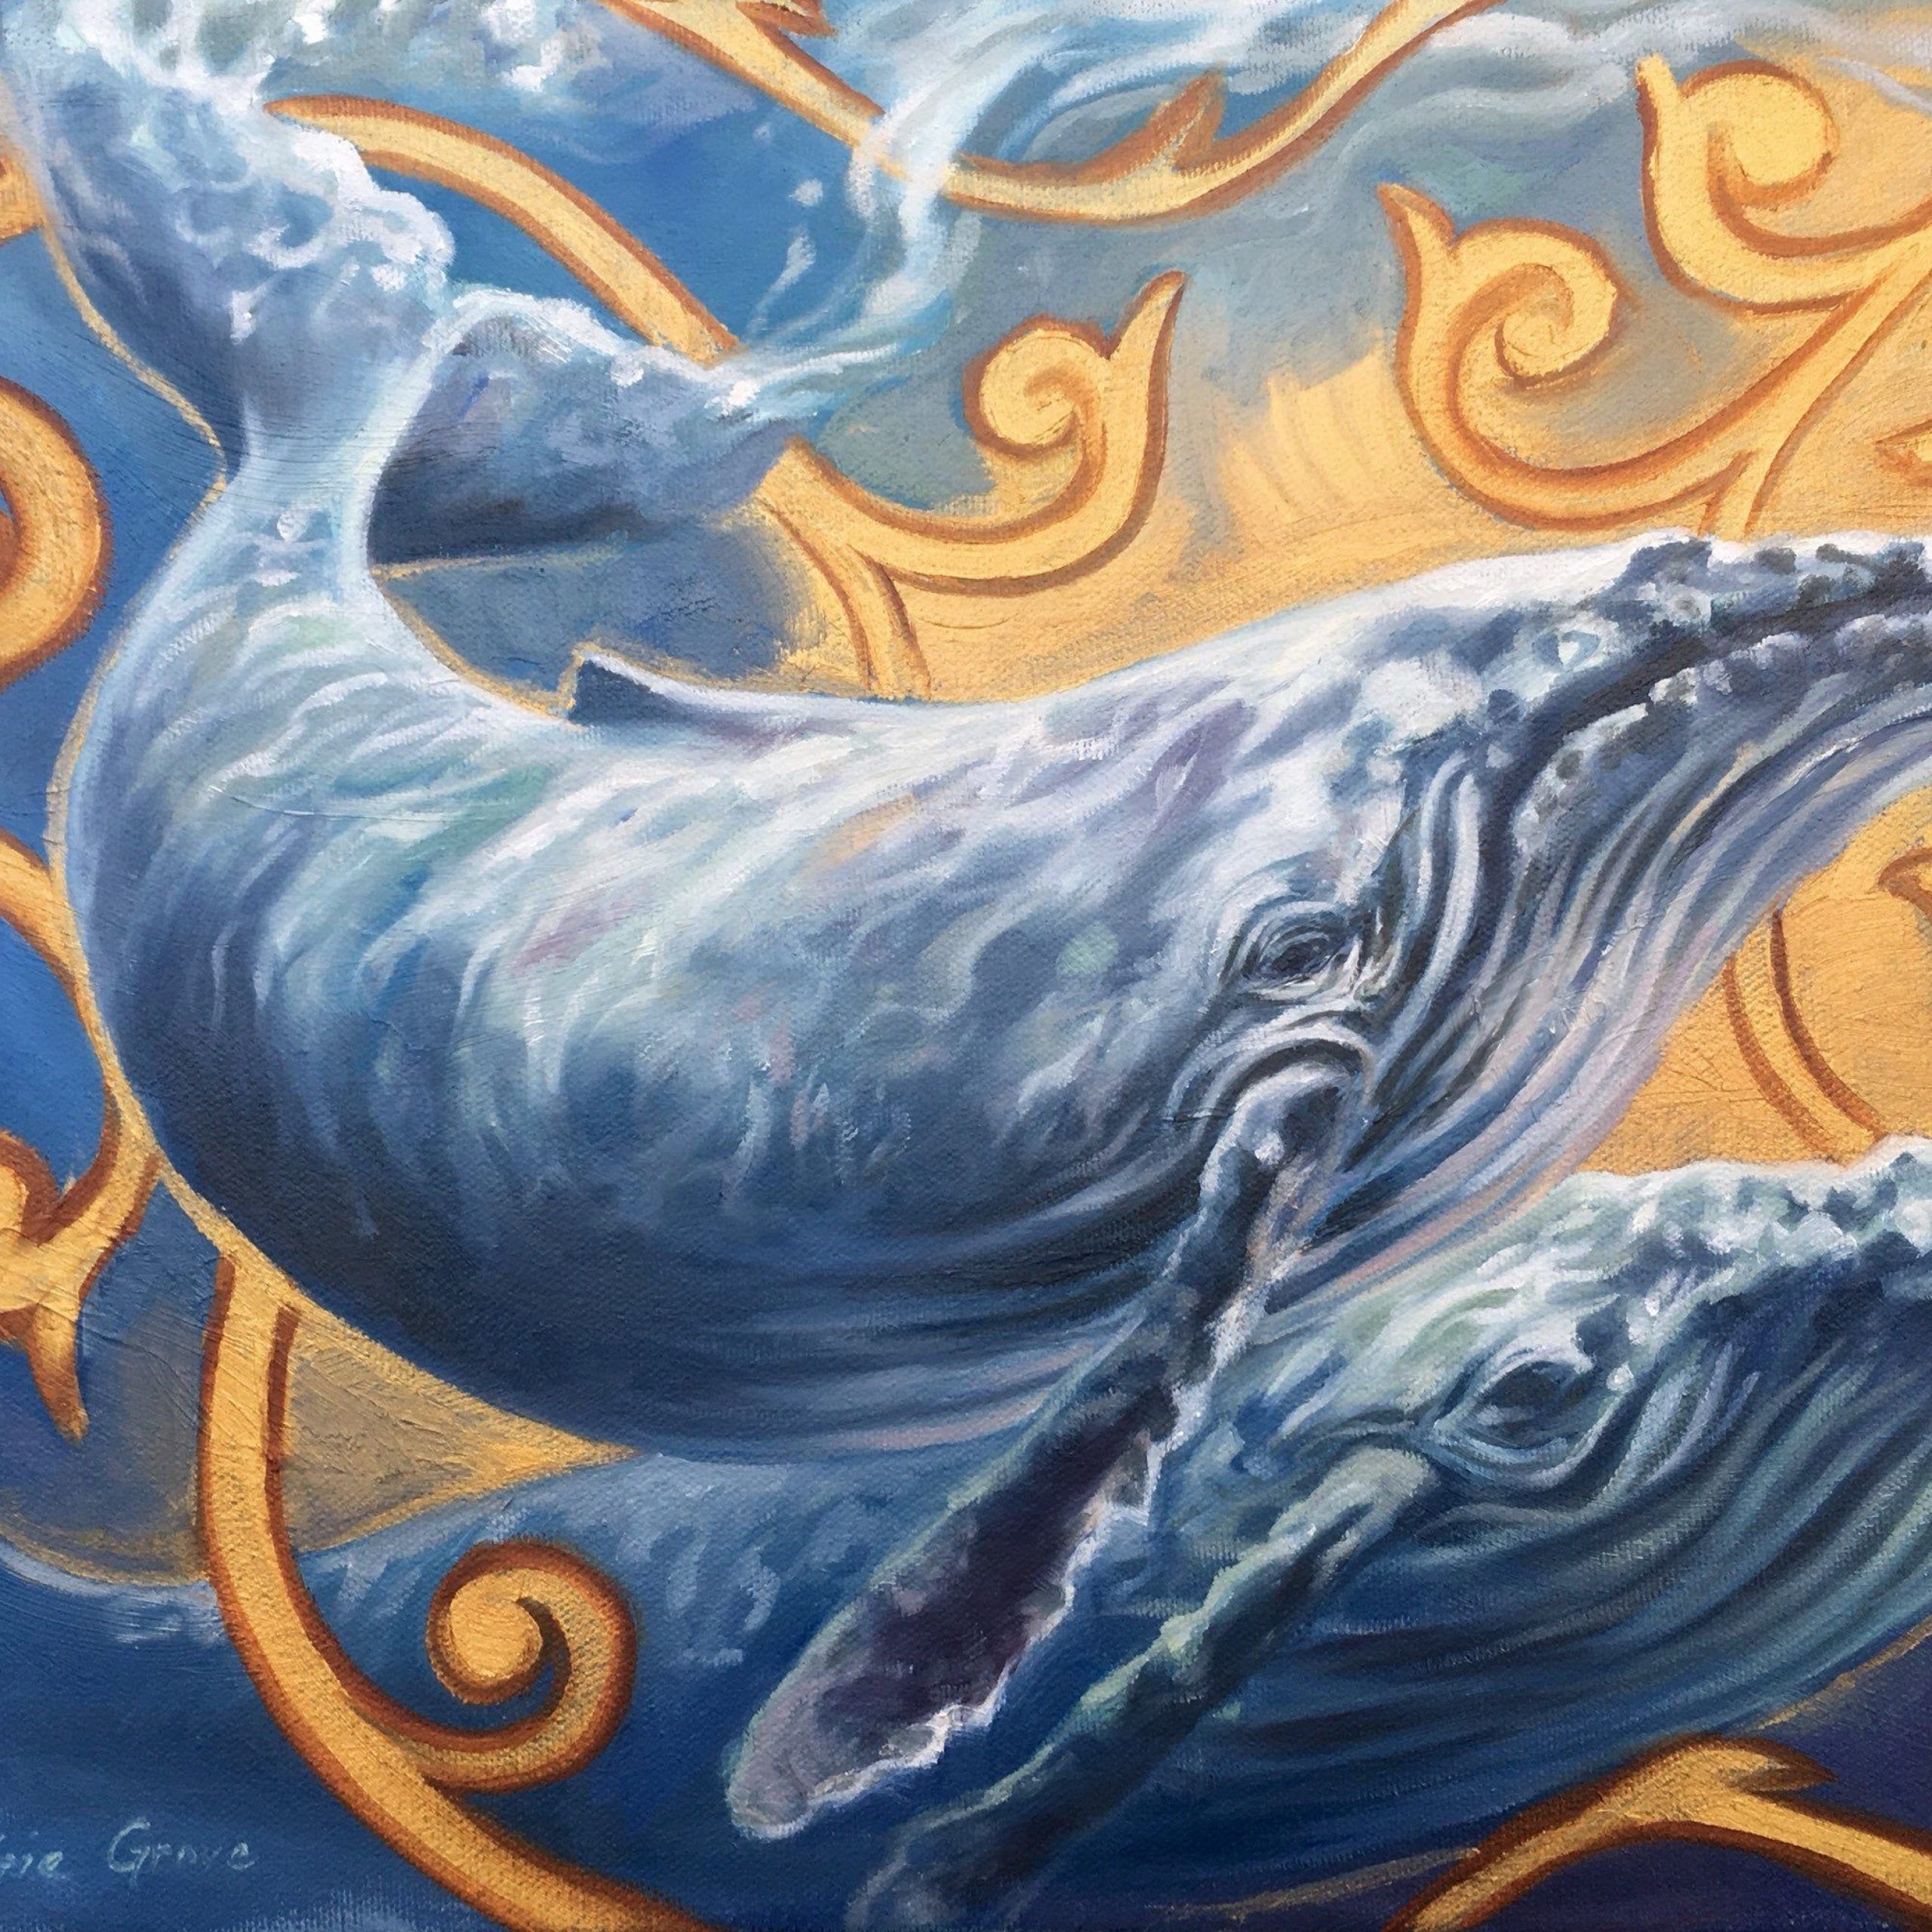 Humpback Whale Painting Golden Creatures: Gentle Company | Etsy | Art In Latest Humpback Whale Wall Art (View 9 of 20)